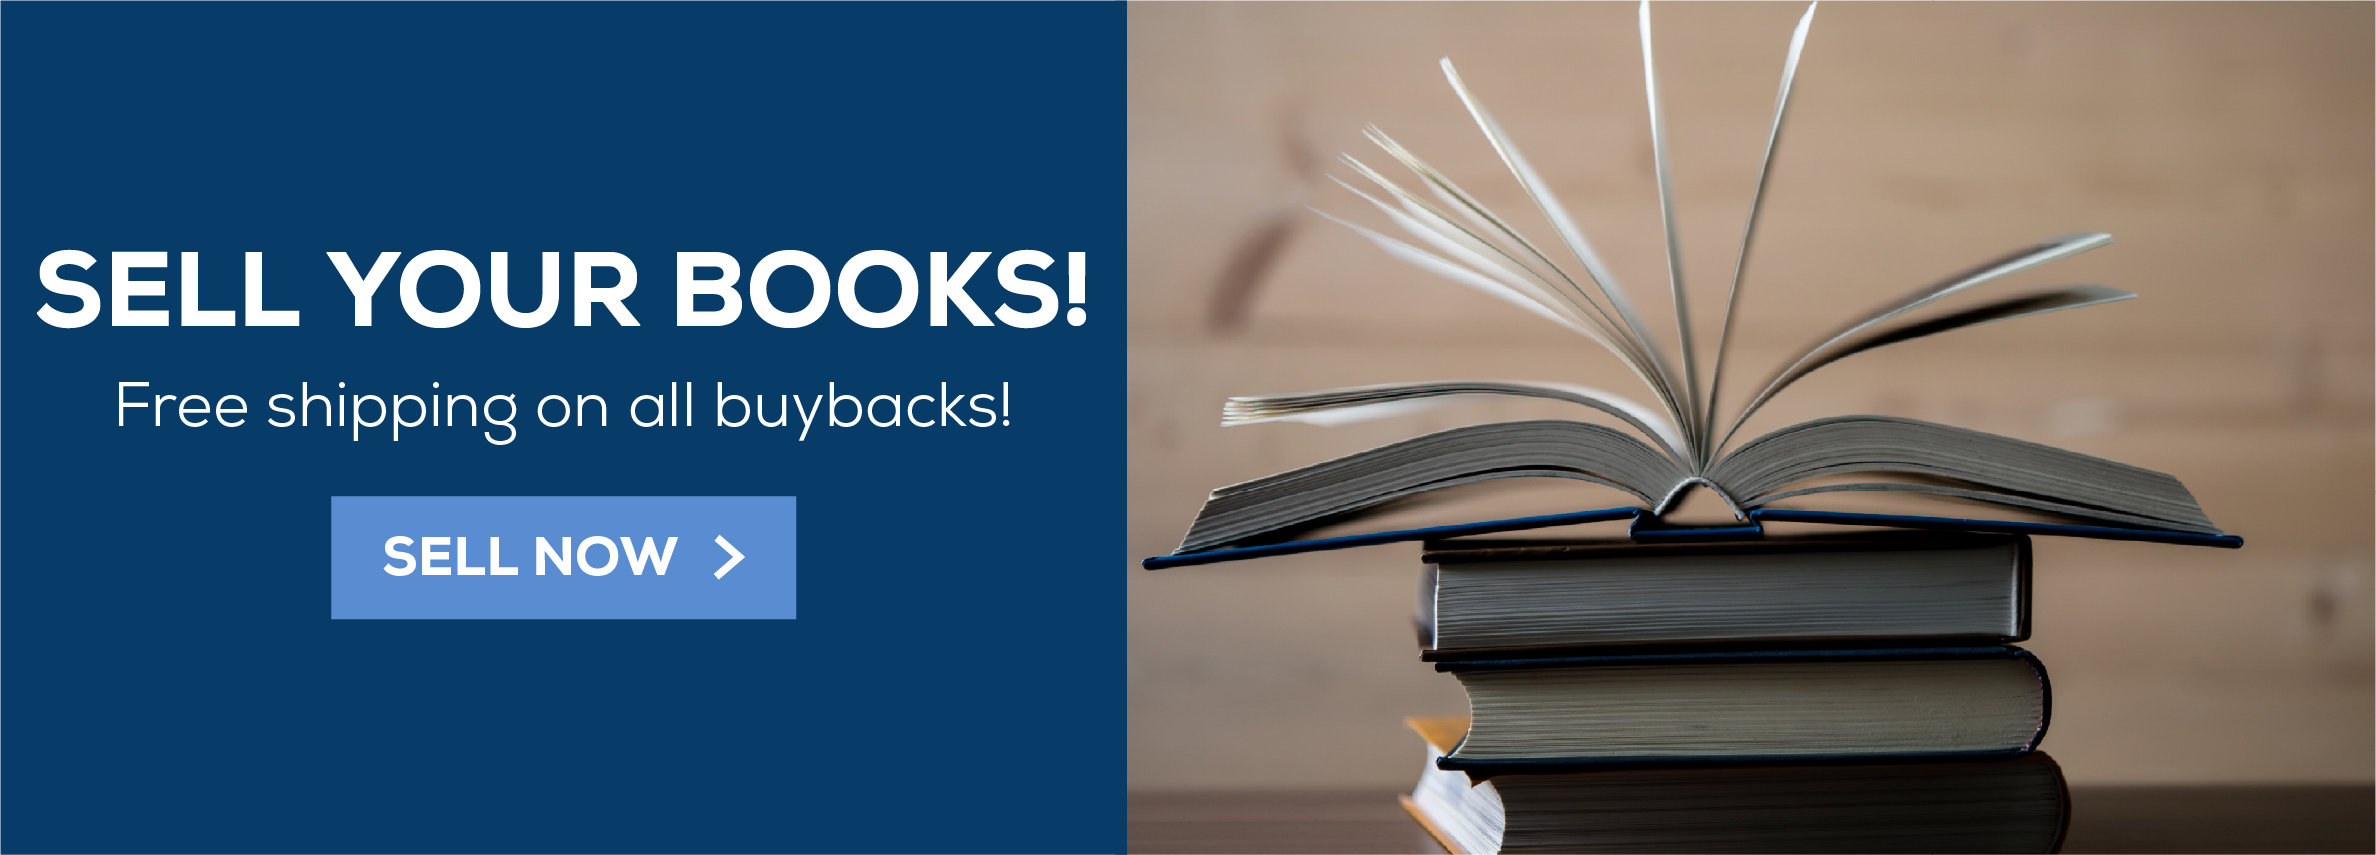 Sell your books! Free shipping on all buybacks! Sell now